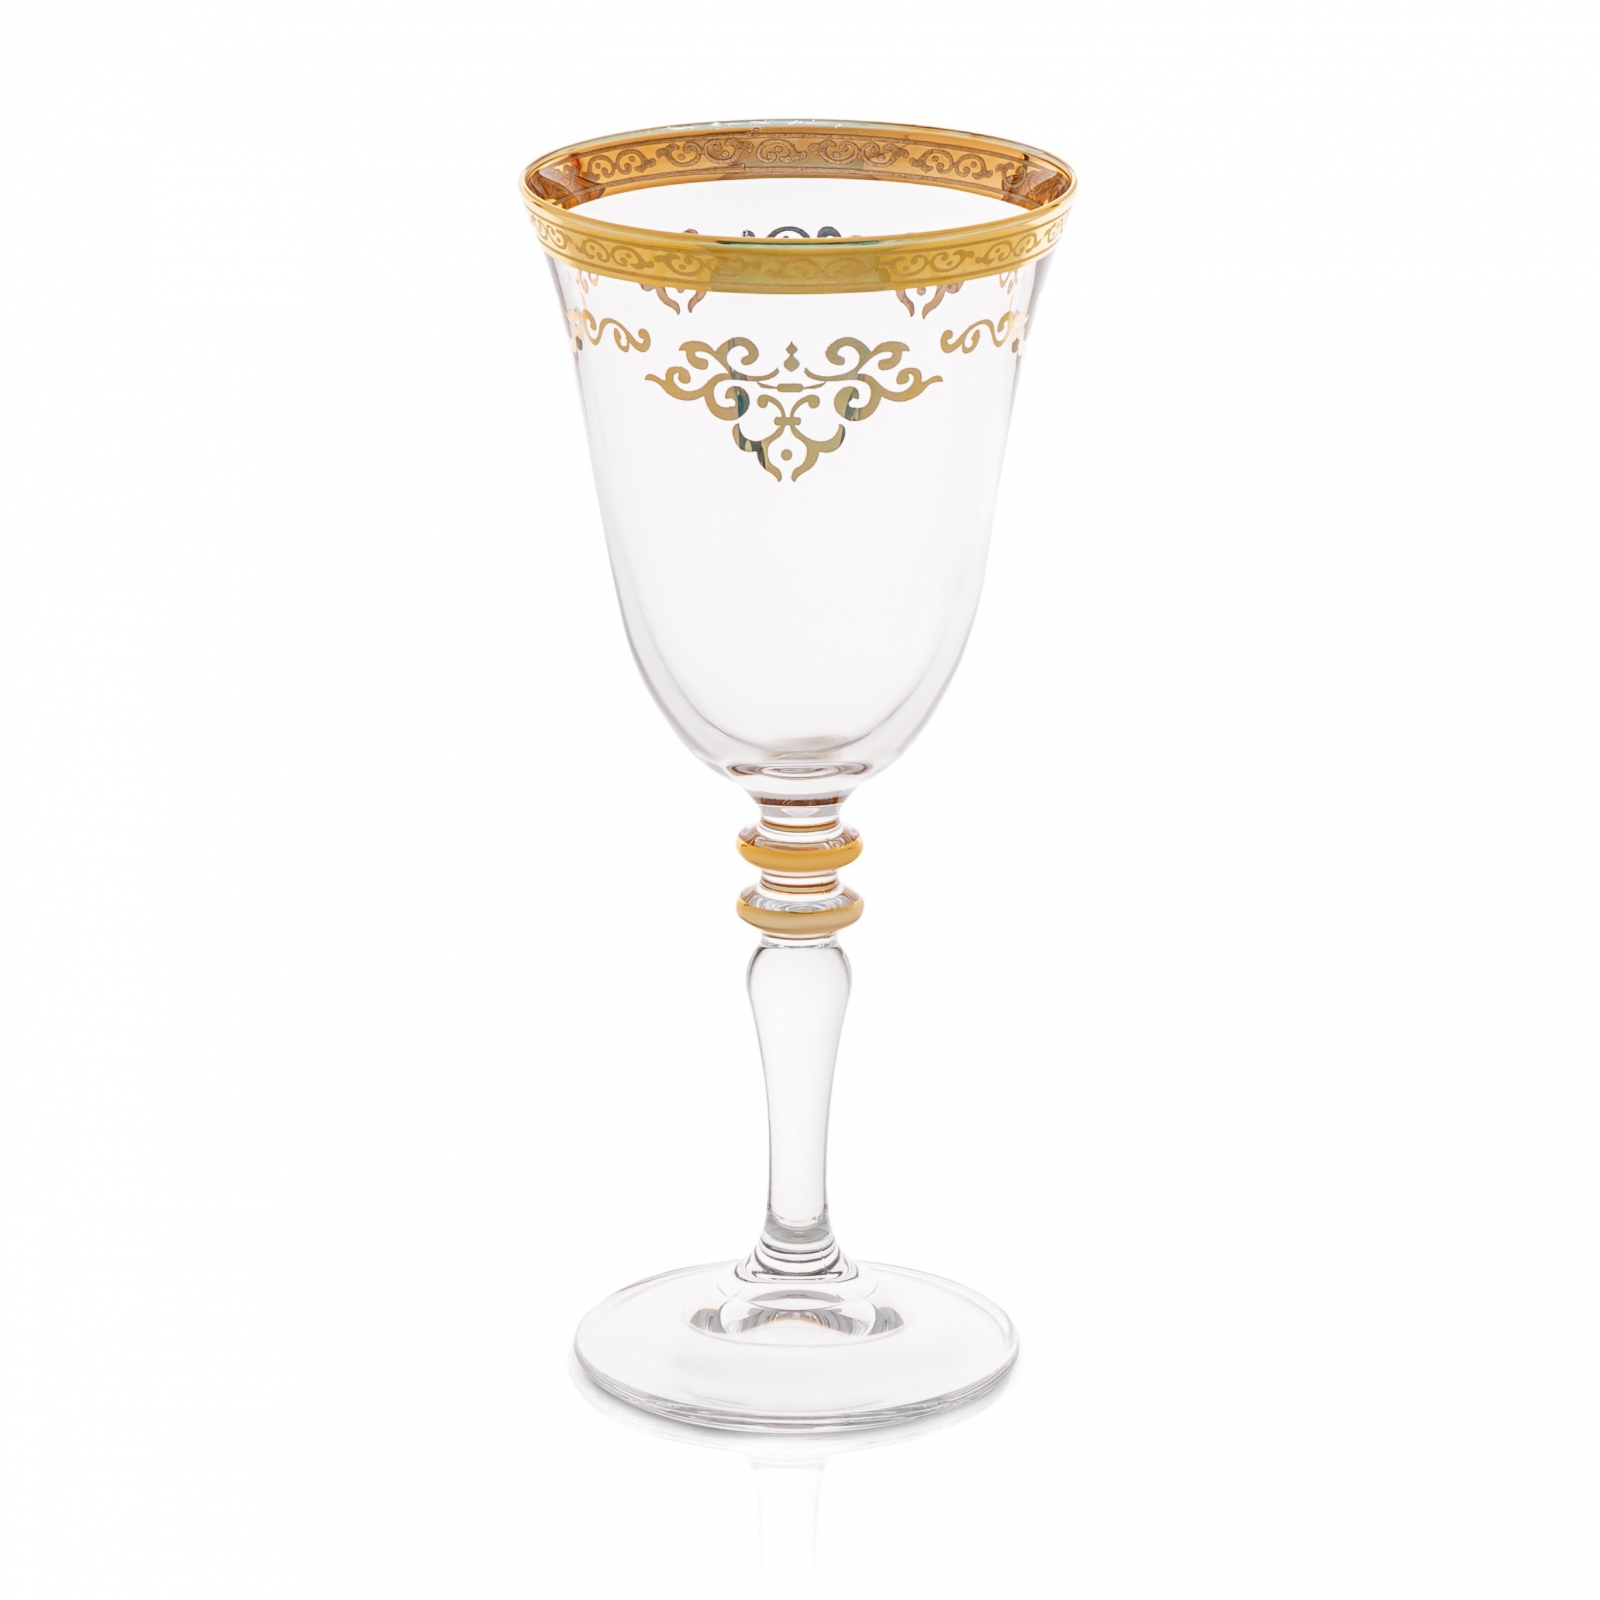 Set of 6 Glasses with Gold Design